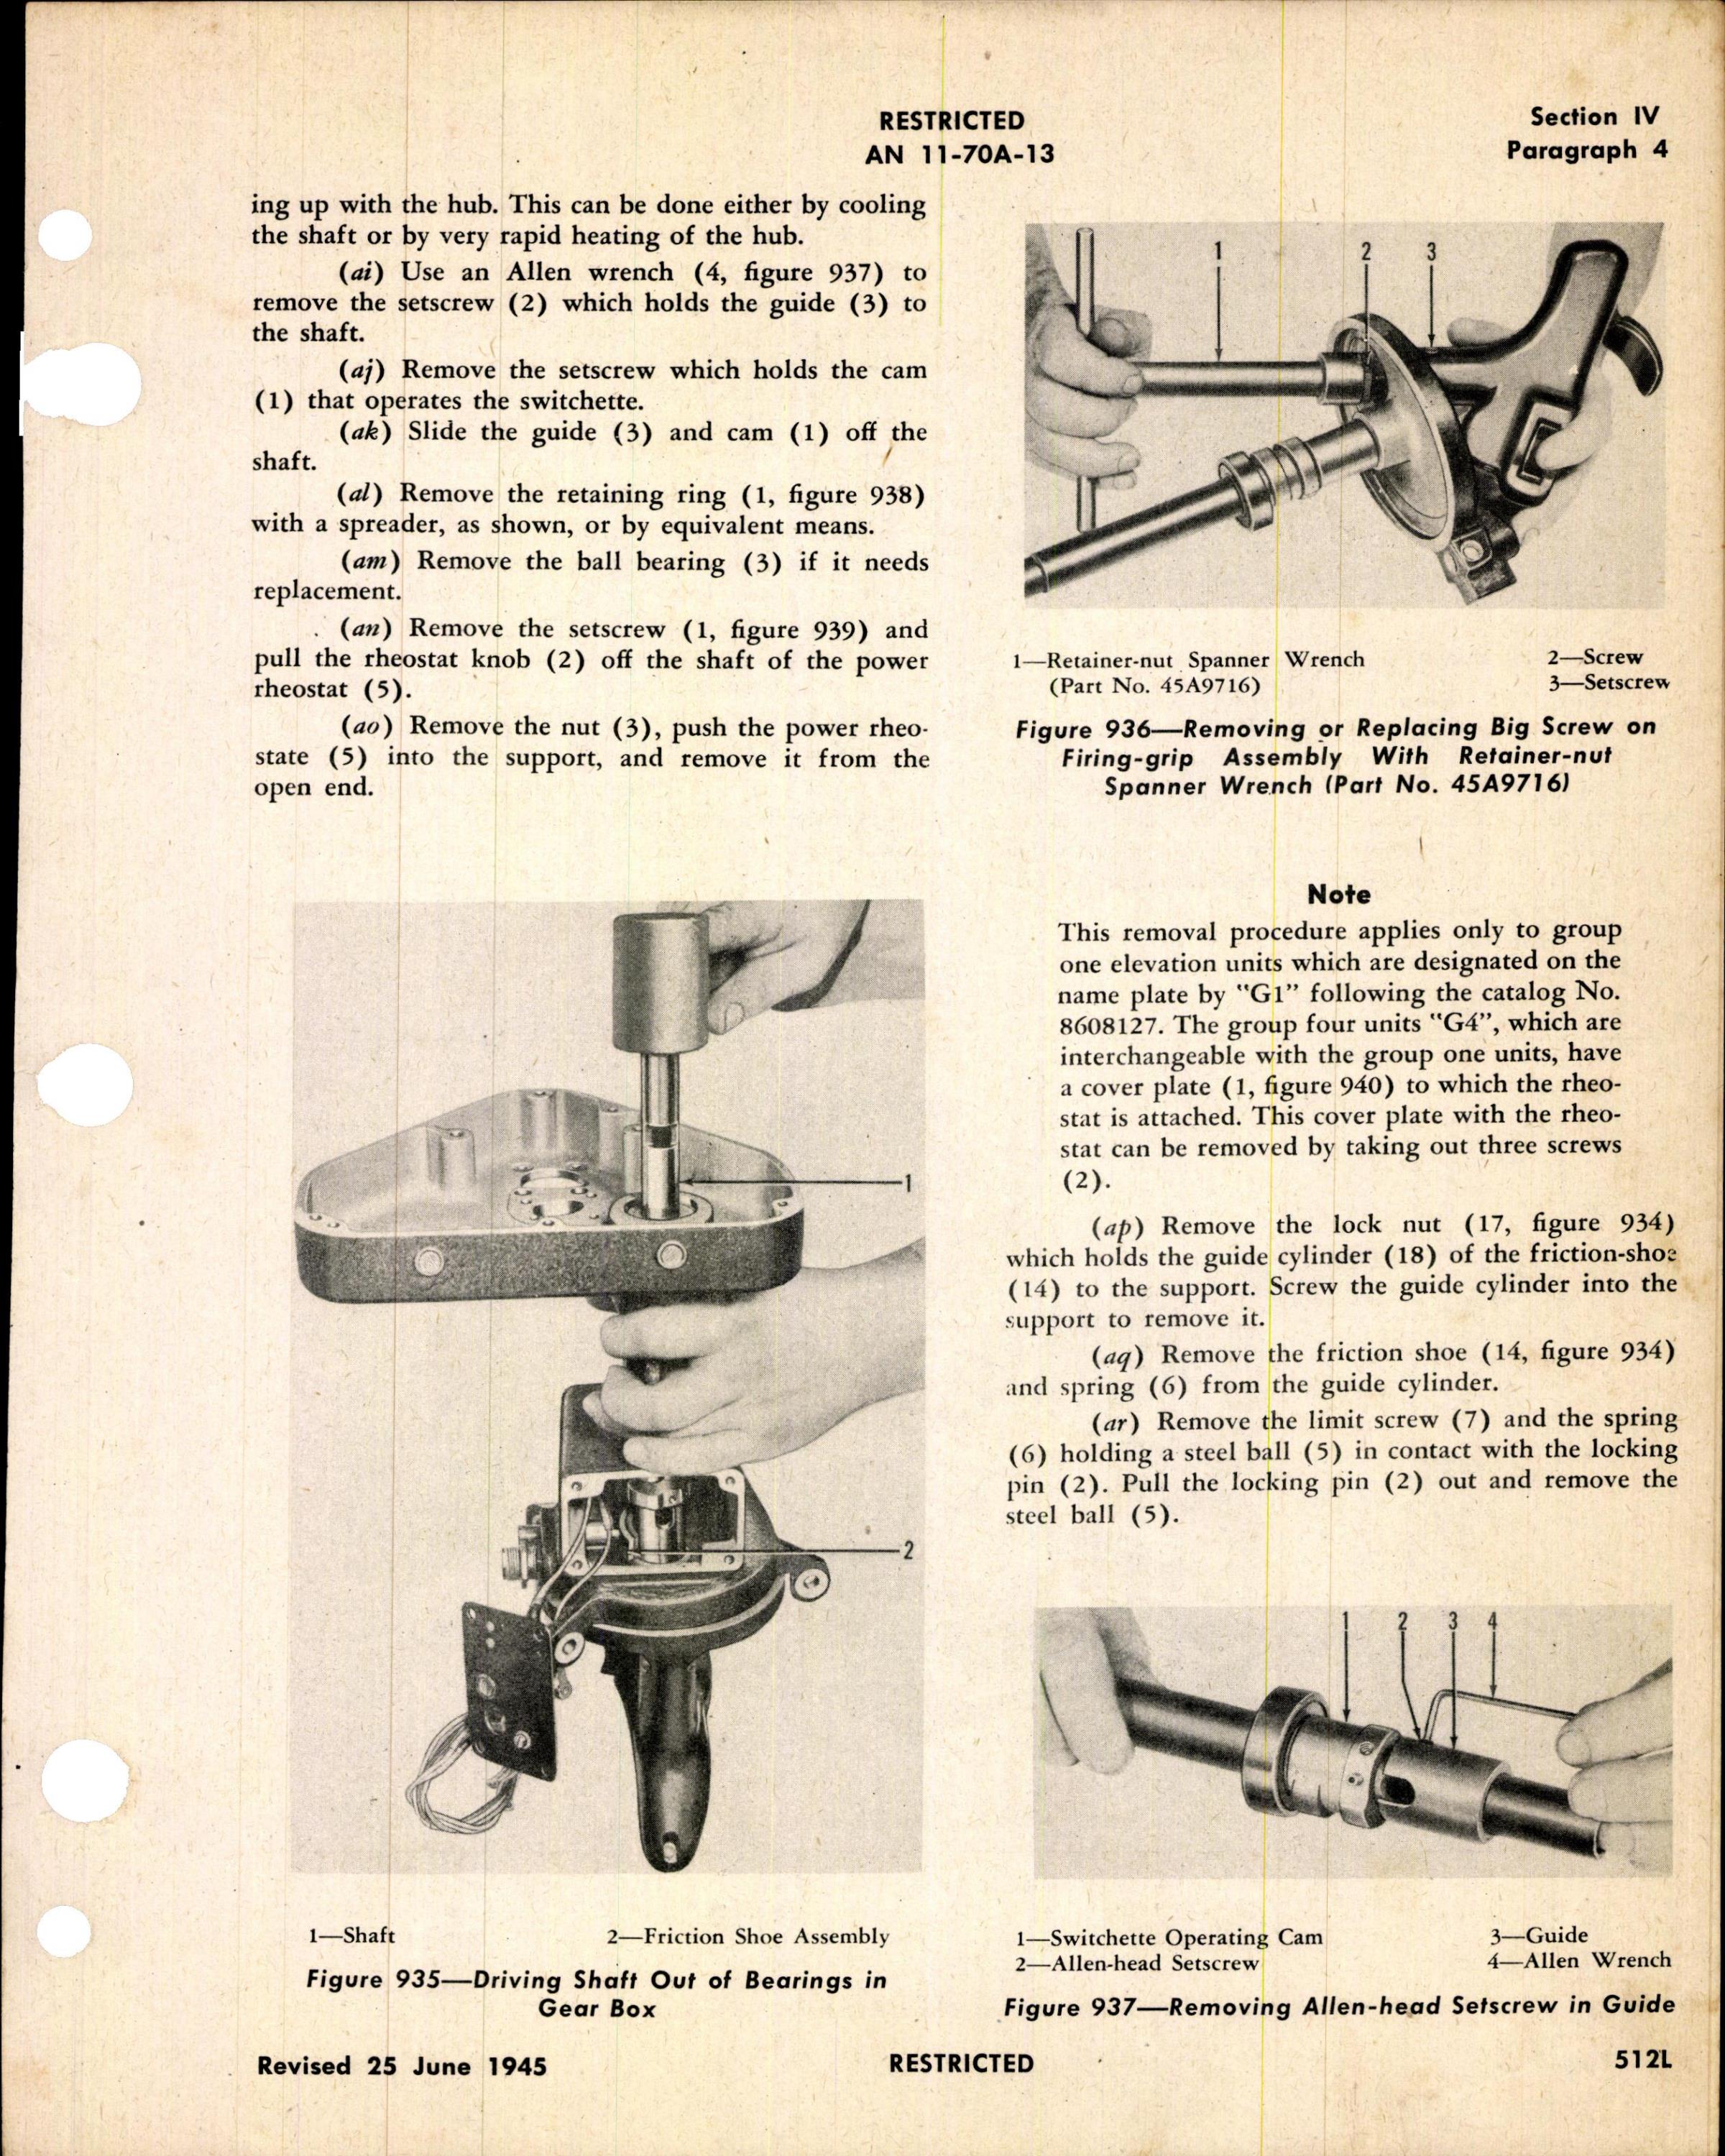 Sample page 3 from AirCorps Library document: Repair of Automatic Gun Charger - General Electric No. 8252911G1